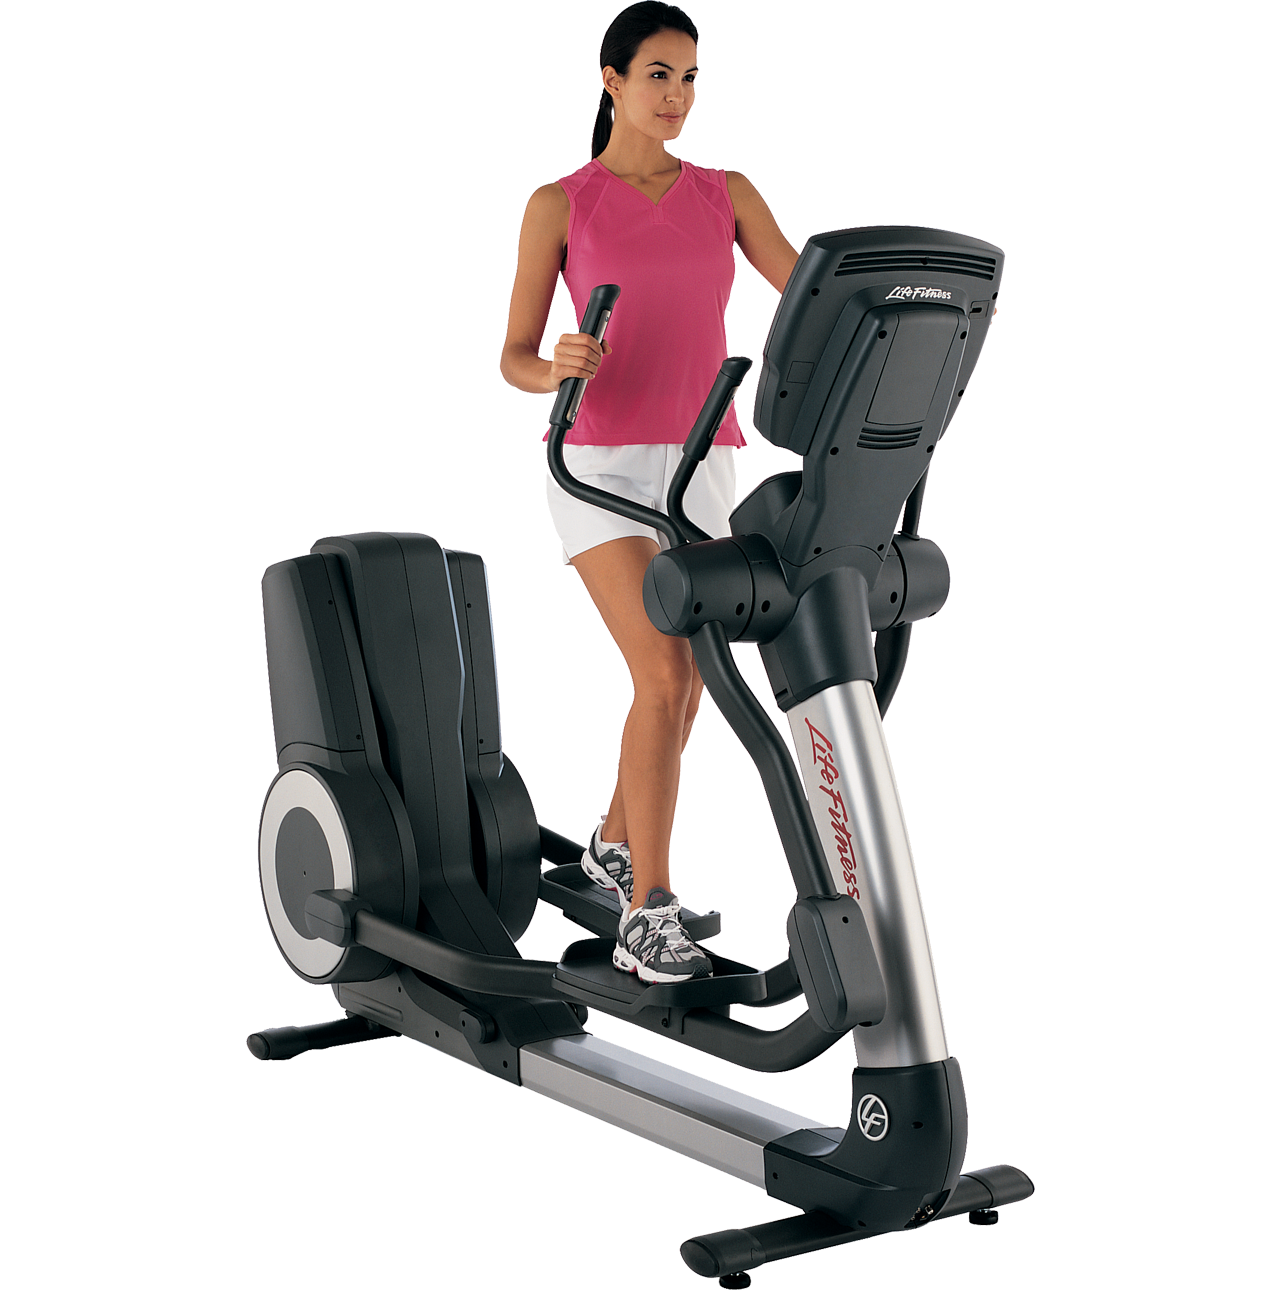 My Talks about Healthy Life: Some Latest Fitness Equipments